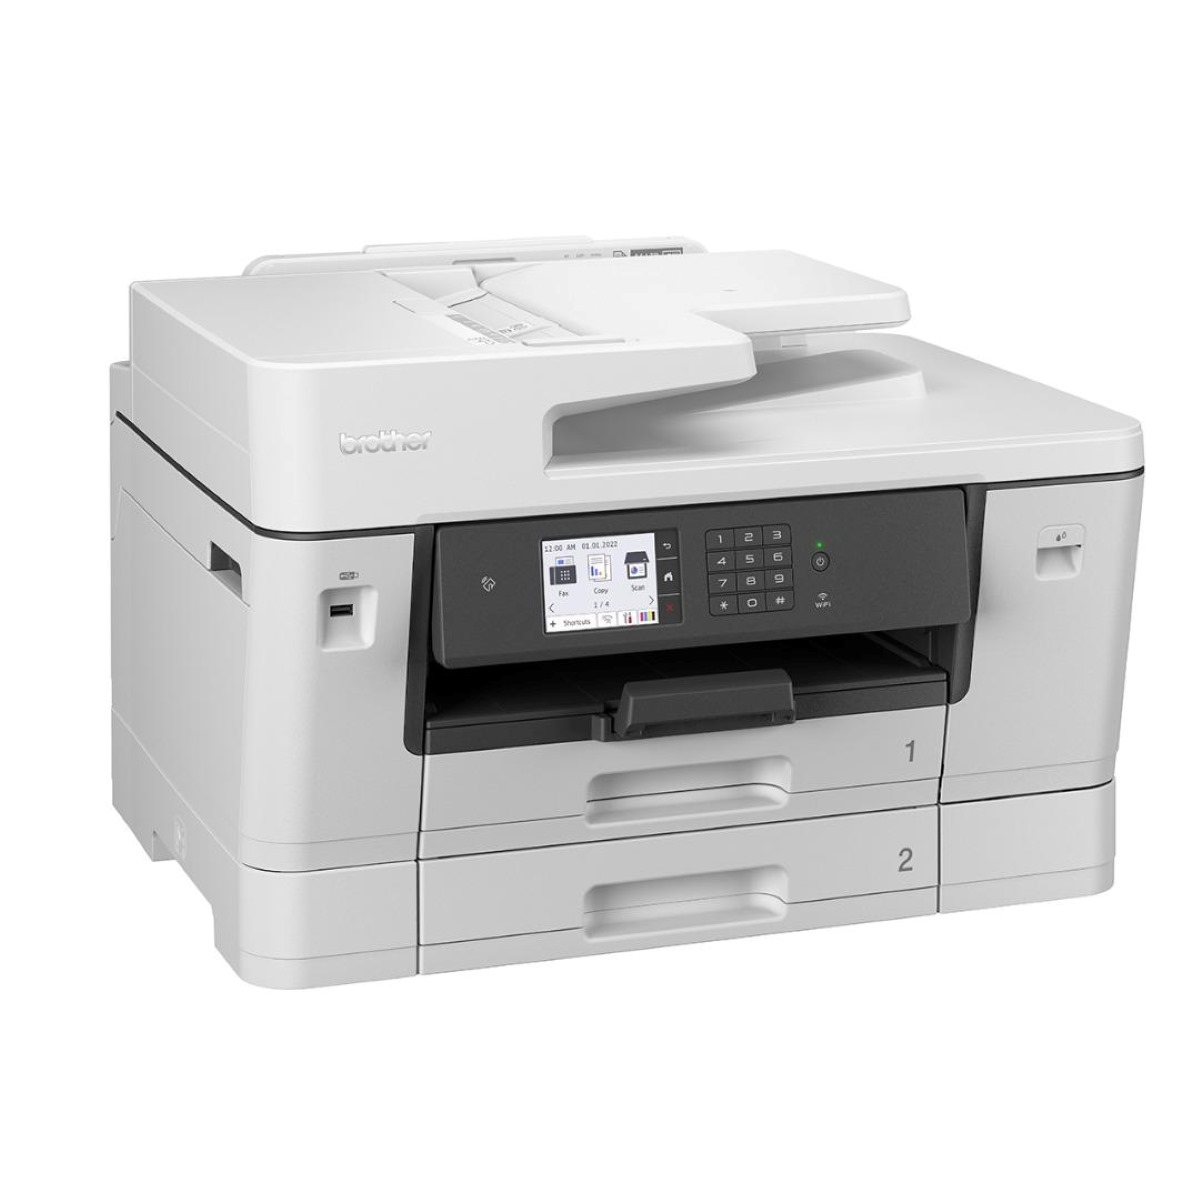 What Is A Dual Tray Printer